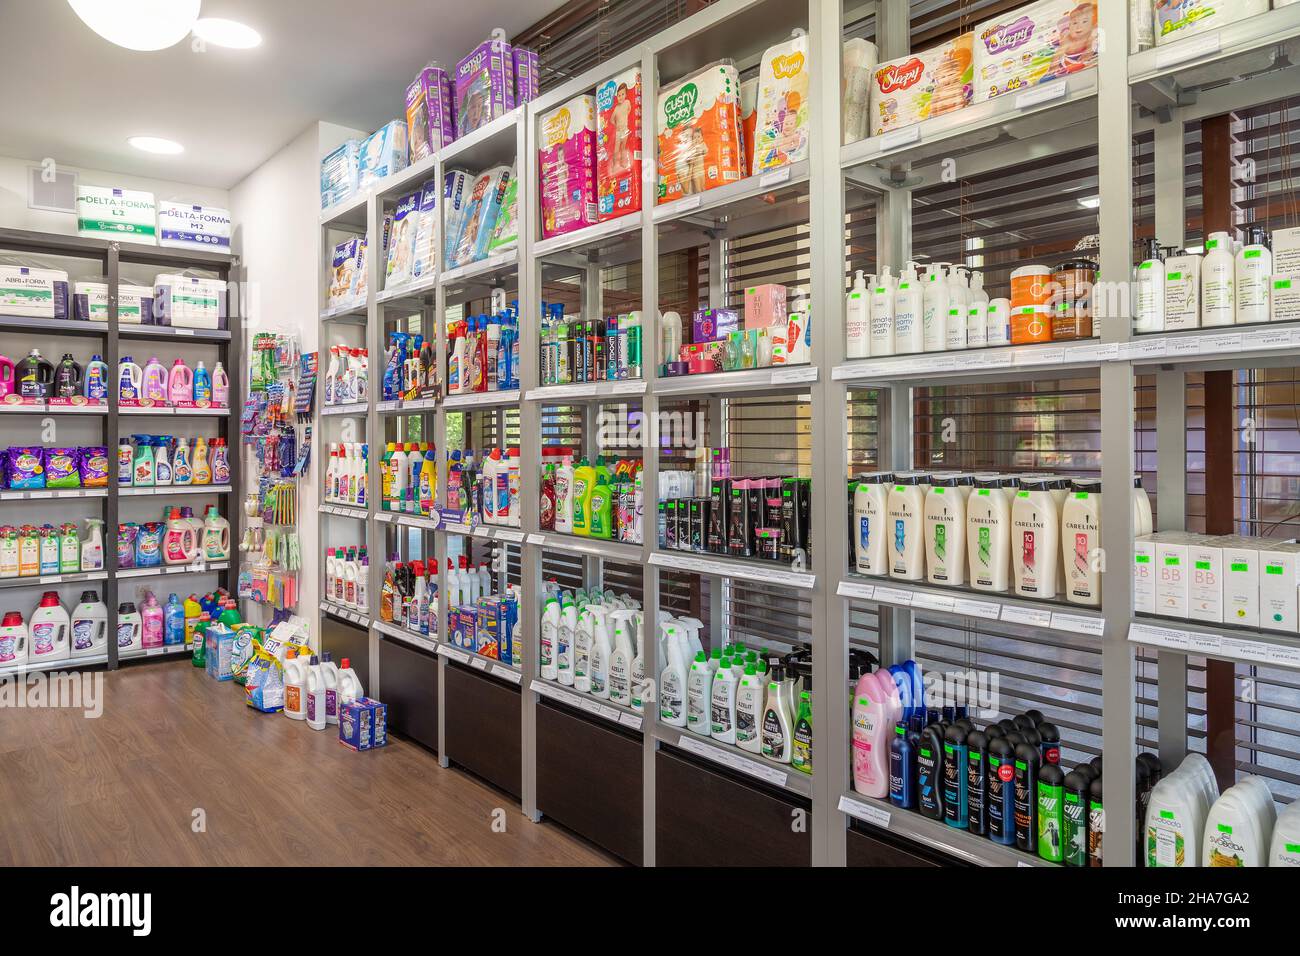 Minsk, Belarus - Nov 29, 2021: shop of household goods and household chemicals Stock Photo